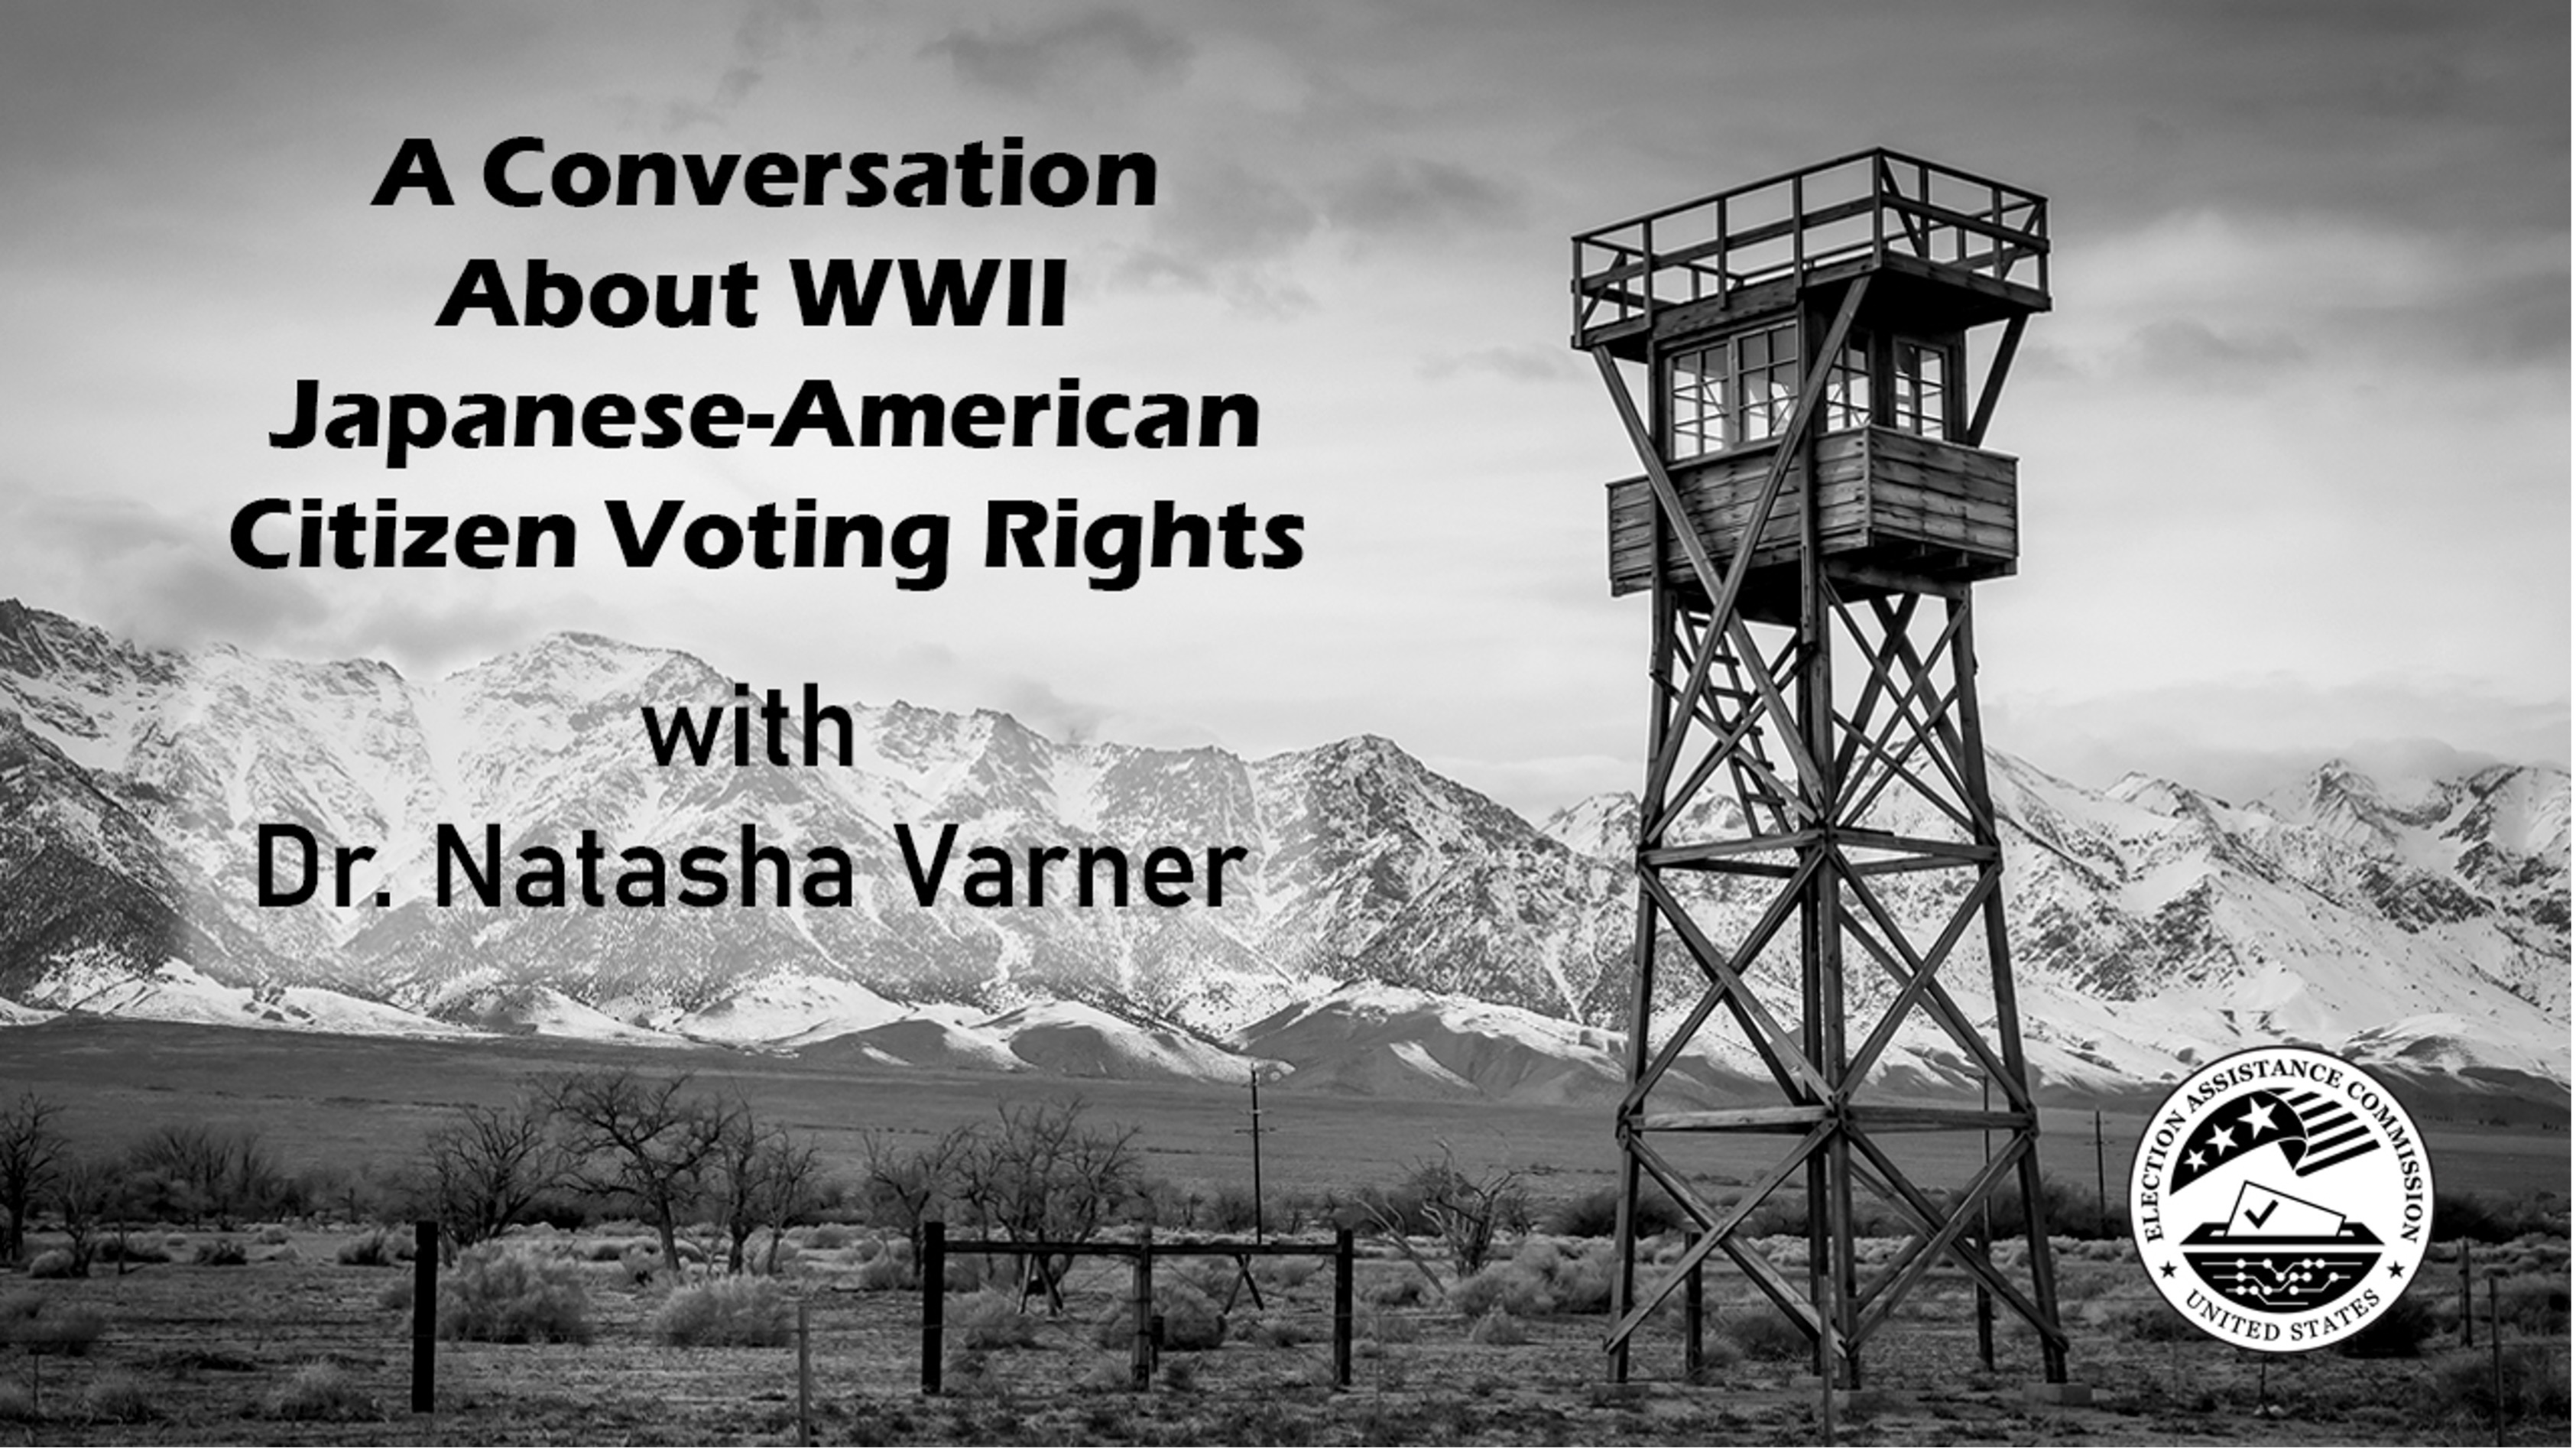 A Conversation About WWII Japanese-American Citizen Voting Rights with Dr. Natasha Varner